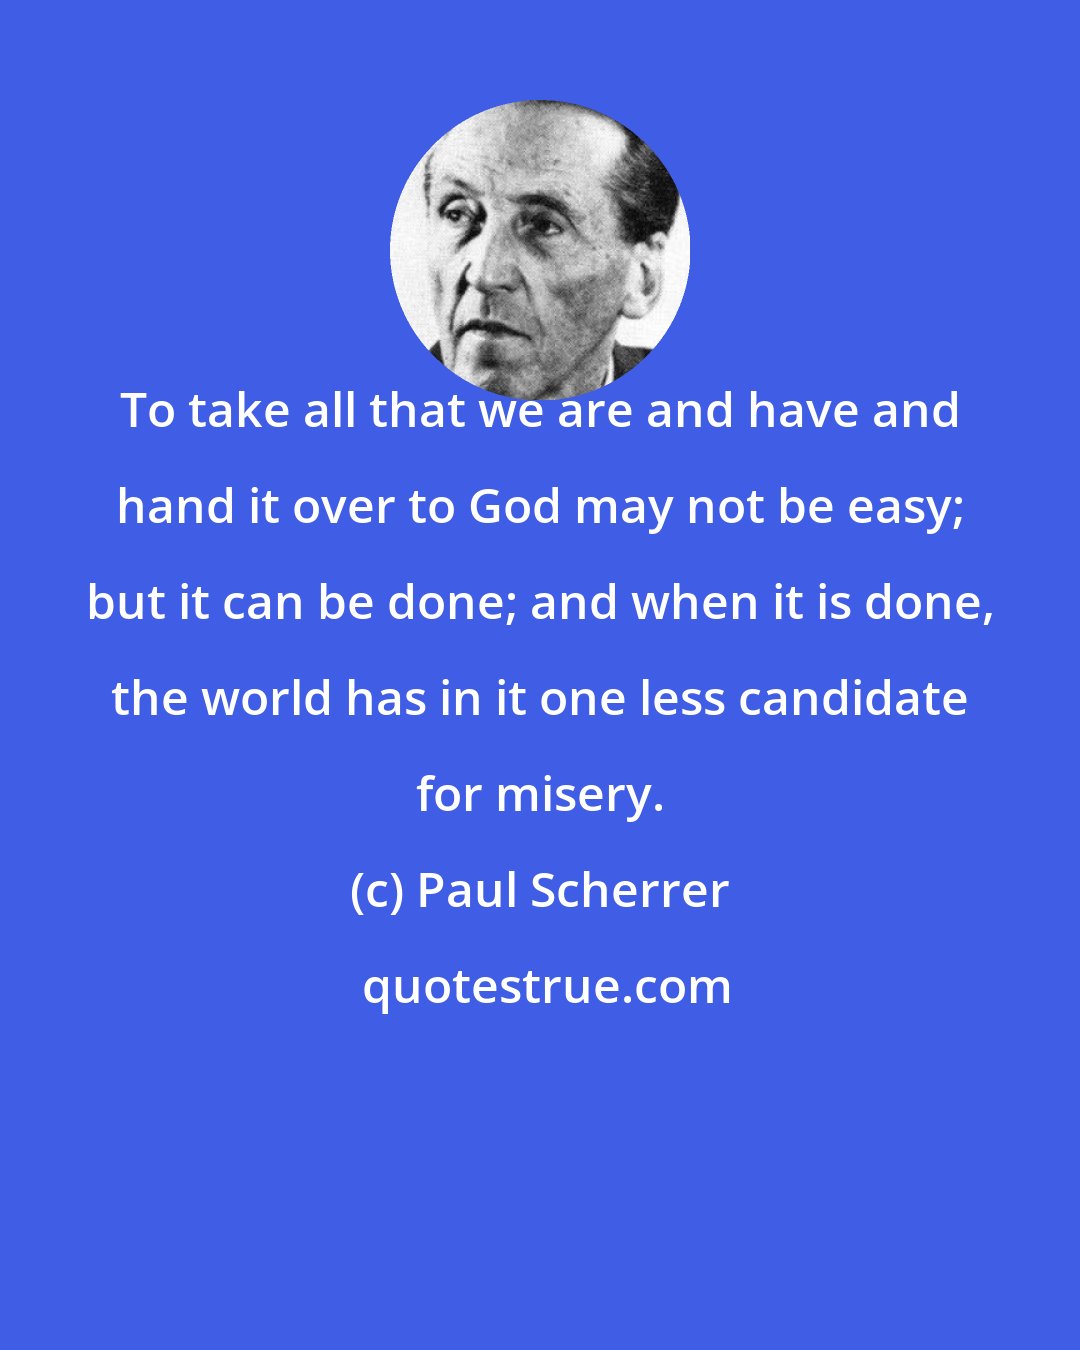 Paul Scherrer: To take all that we are and have and hand it over to God may not be easy; but it can be done; and when it is done, the world has in it one less candidate for misery.